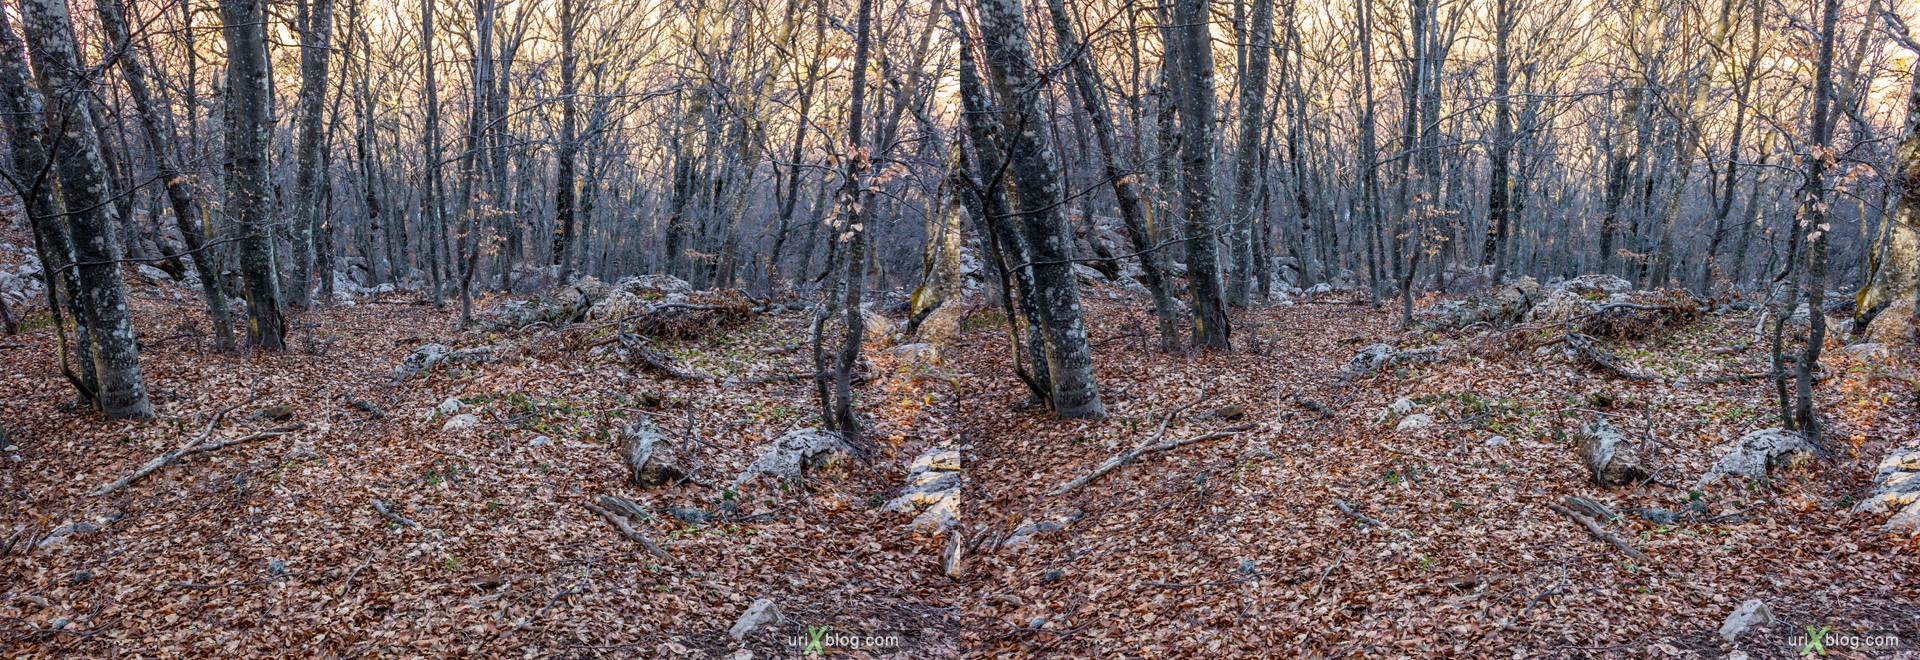 2012, Ai-Petri, mountains, Crimea, Russia, Ukraine, forest, winter, 3D, stereo pair, cross-eyed, crossview, cross view stereo pair, stereoscopic